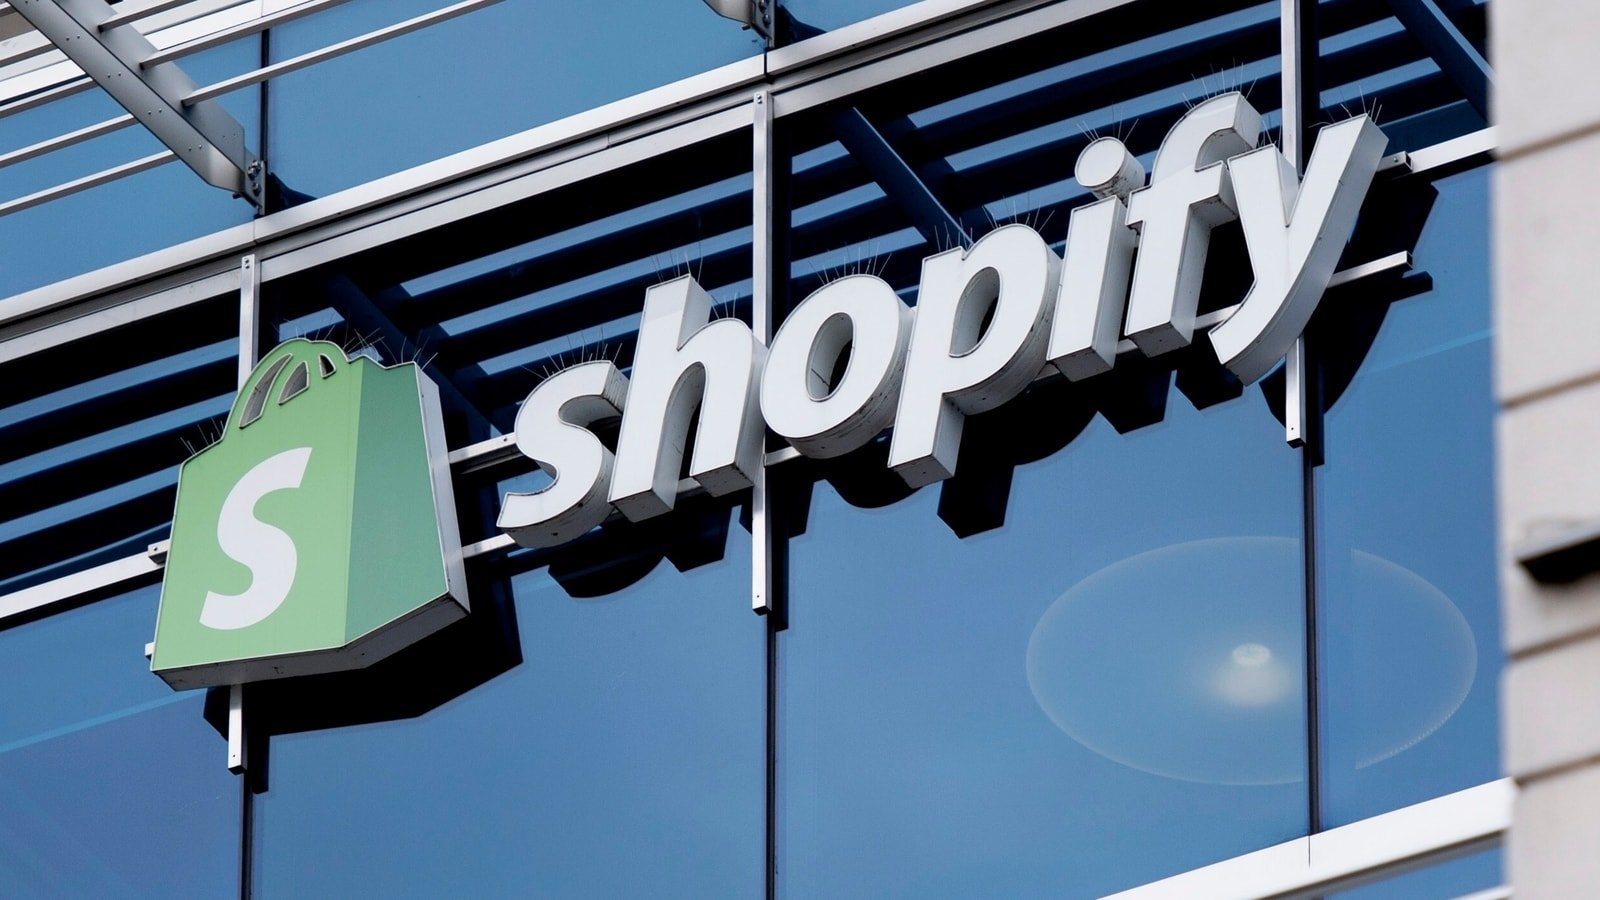 How to set up a shopify store: before you start
